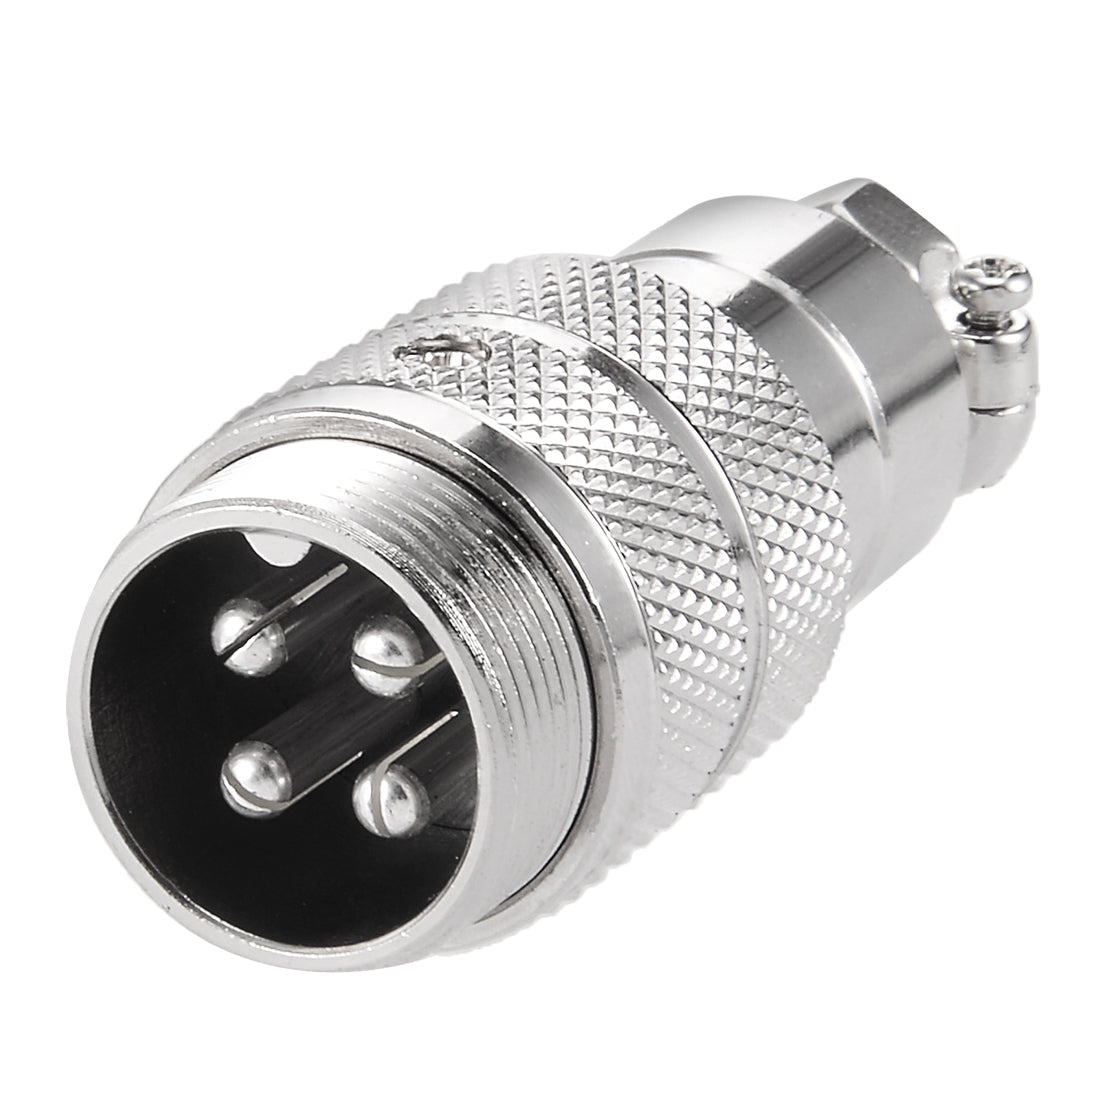 uxcell Uxcell Aviation Connector, 20mm 4P 10A 250V GX20-4 Waterproof Male Wire Panel Power Chassis Metal Fittings Connector Aviation Silver Tone